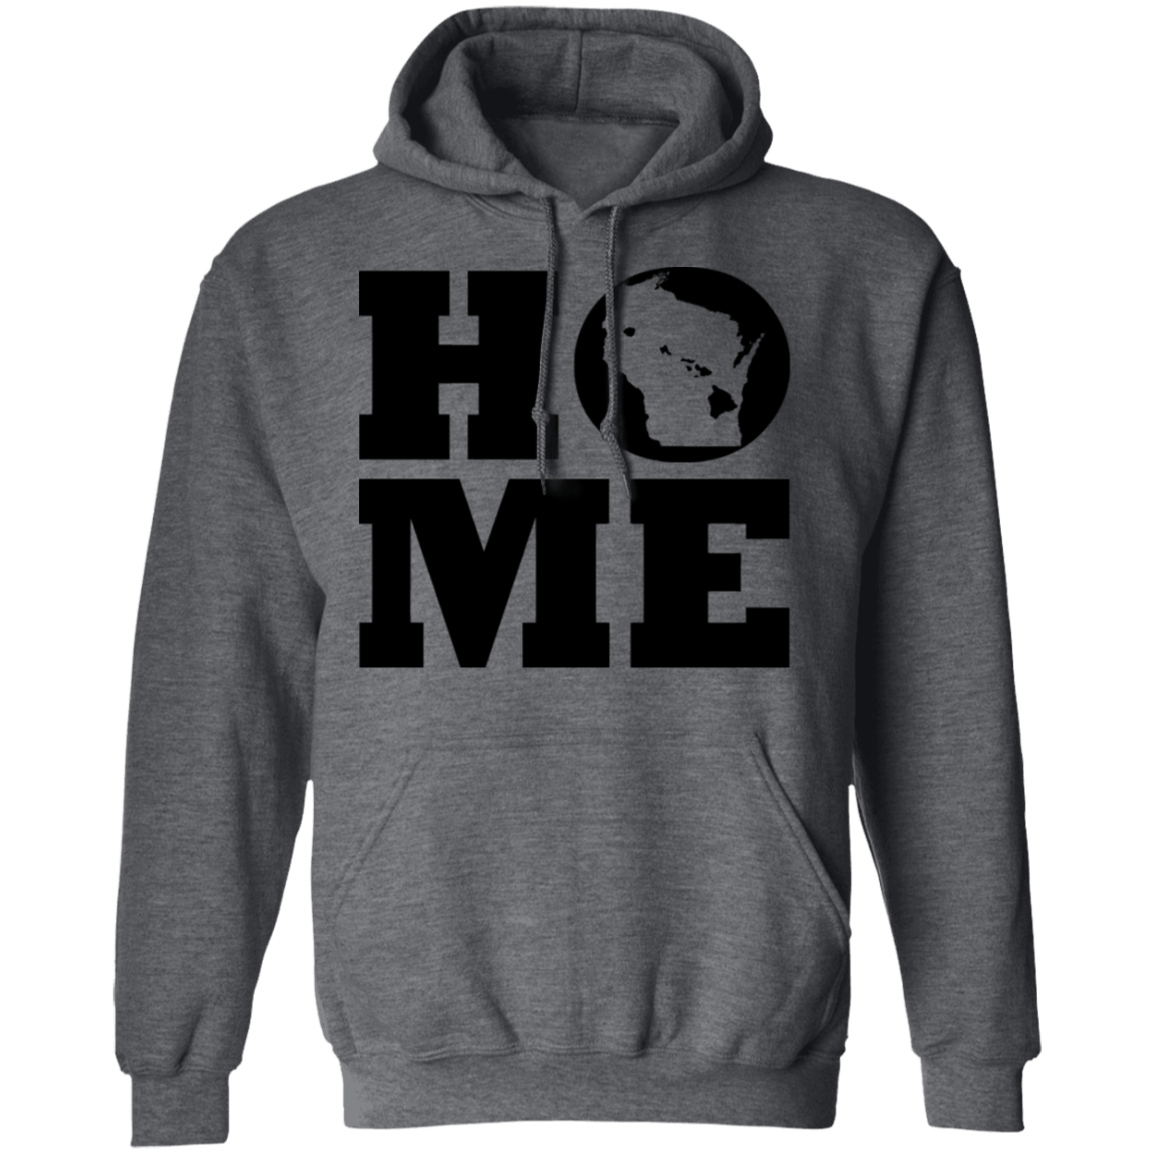 Home Roots Hawai'i and Wisconsin Pullover Hoodie